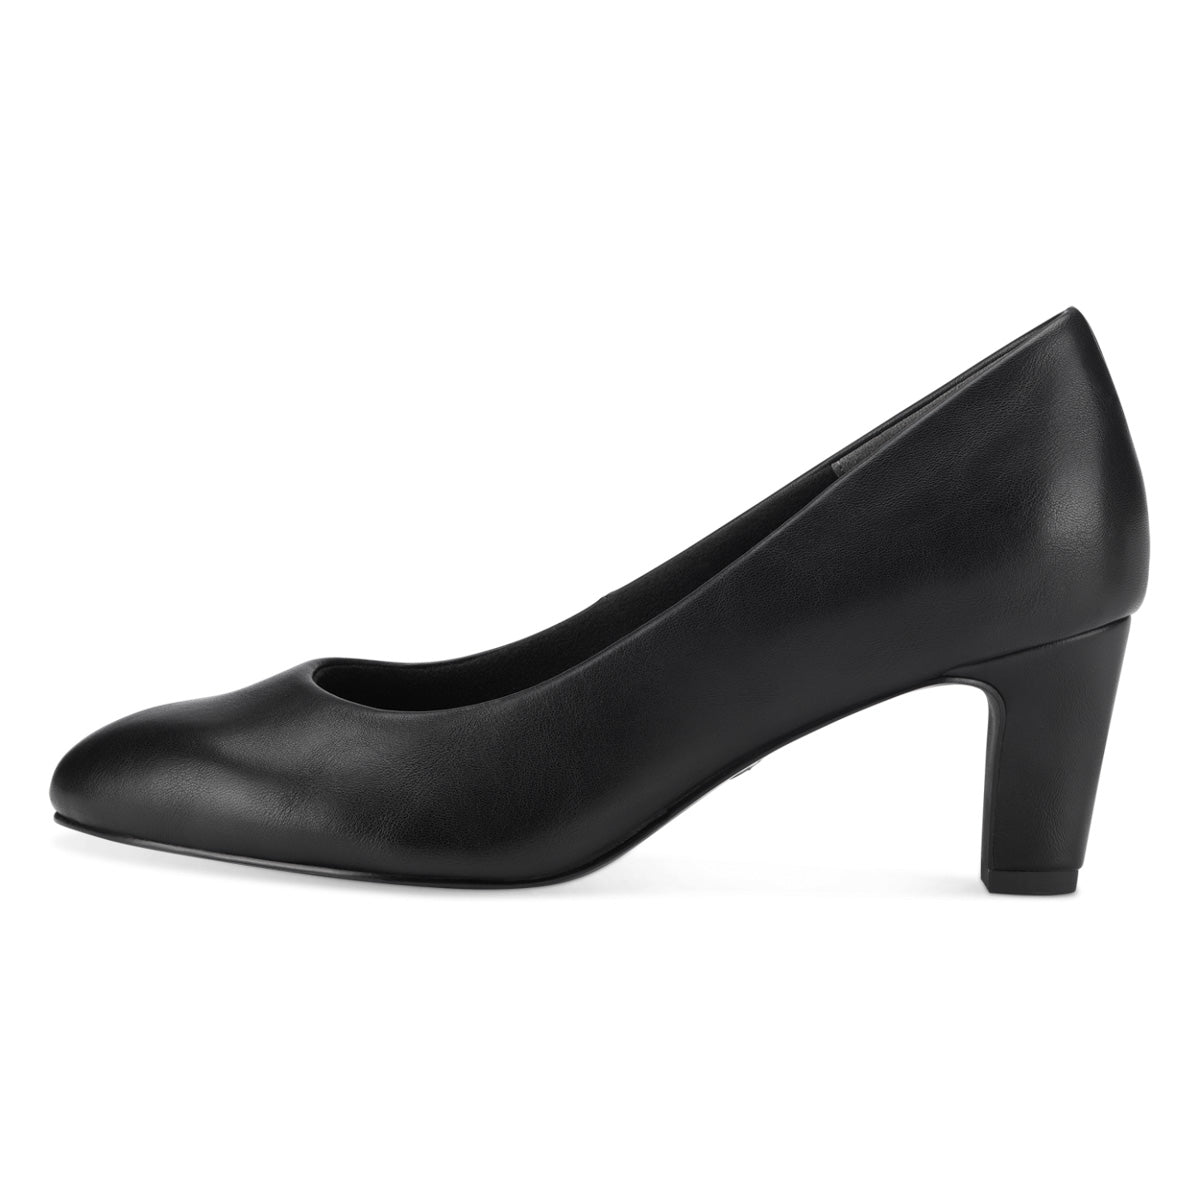 Quintessential Rounded Toe Court Shoe